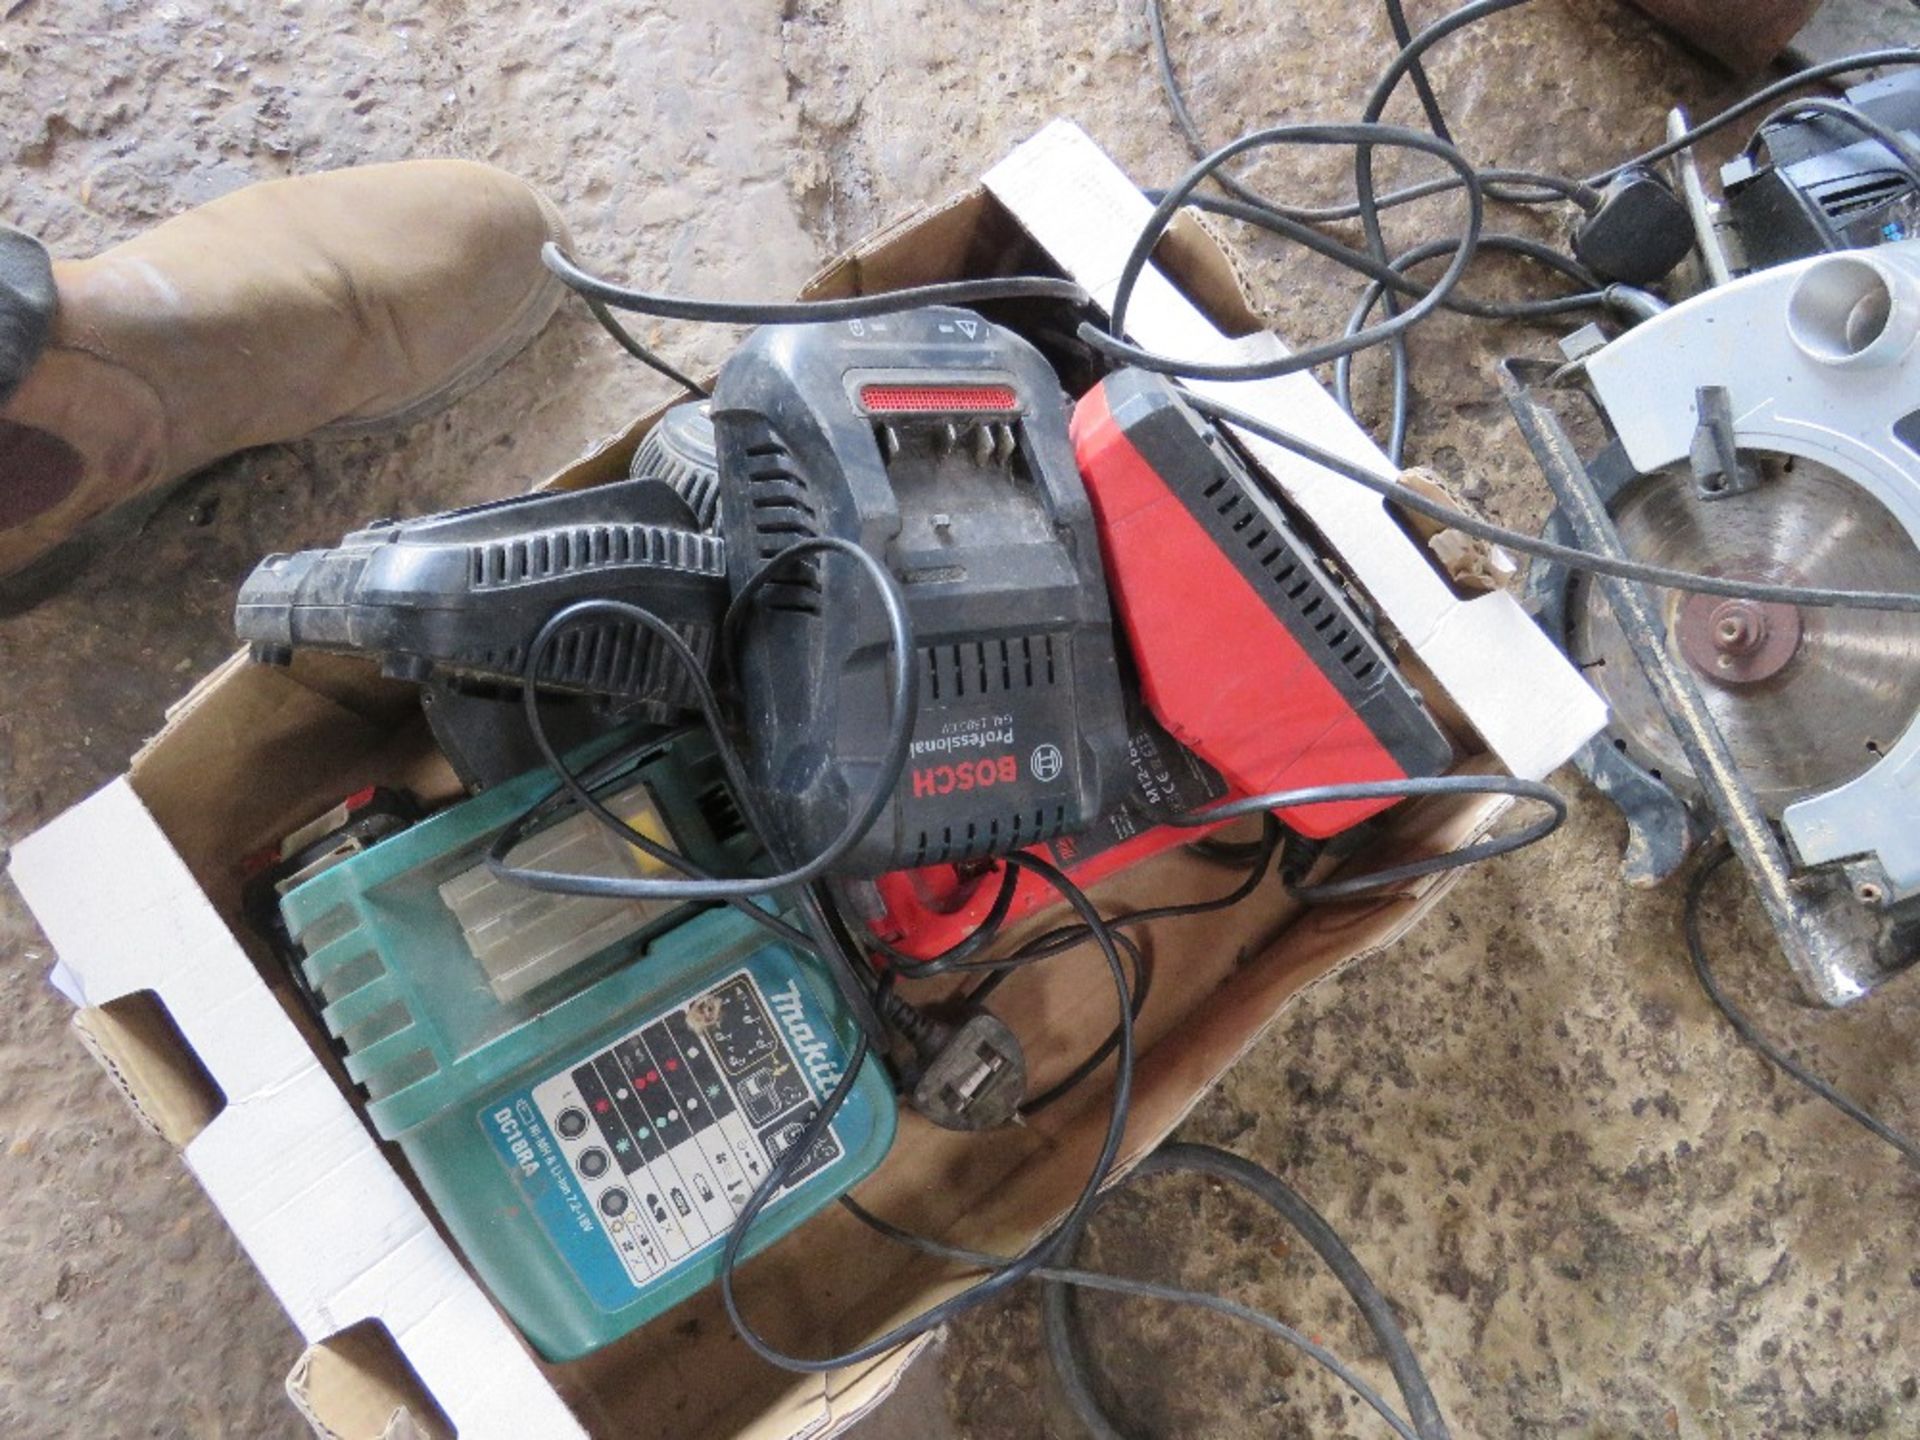 BATTERY TOOL CHARGERS PLUS 4NO 240VOLT POWER TOOLS.....THIS LOT IS SOLD UNDER THE AUCTIONEERS MARGIN - Image 2 of 4